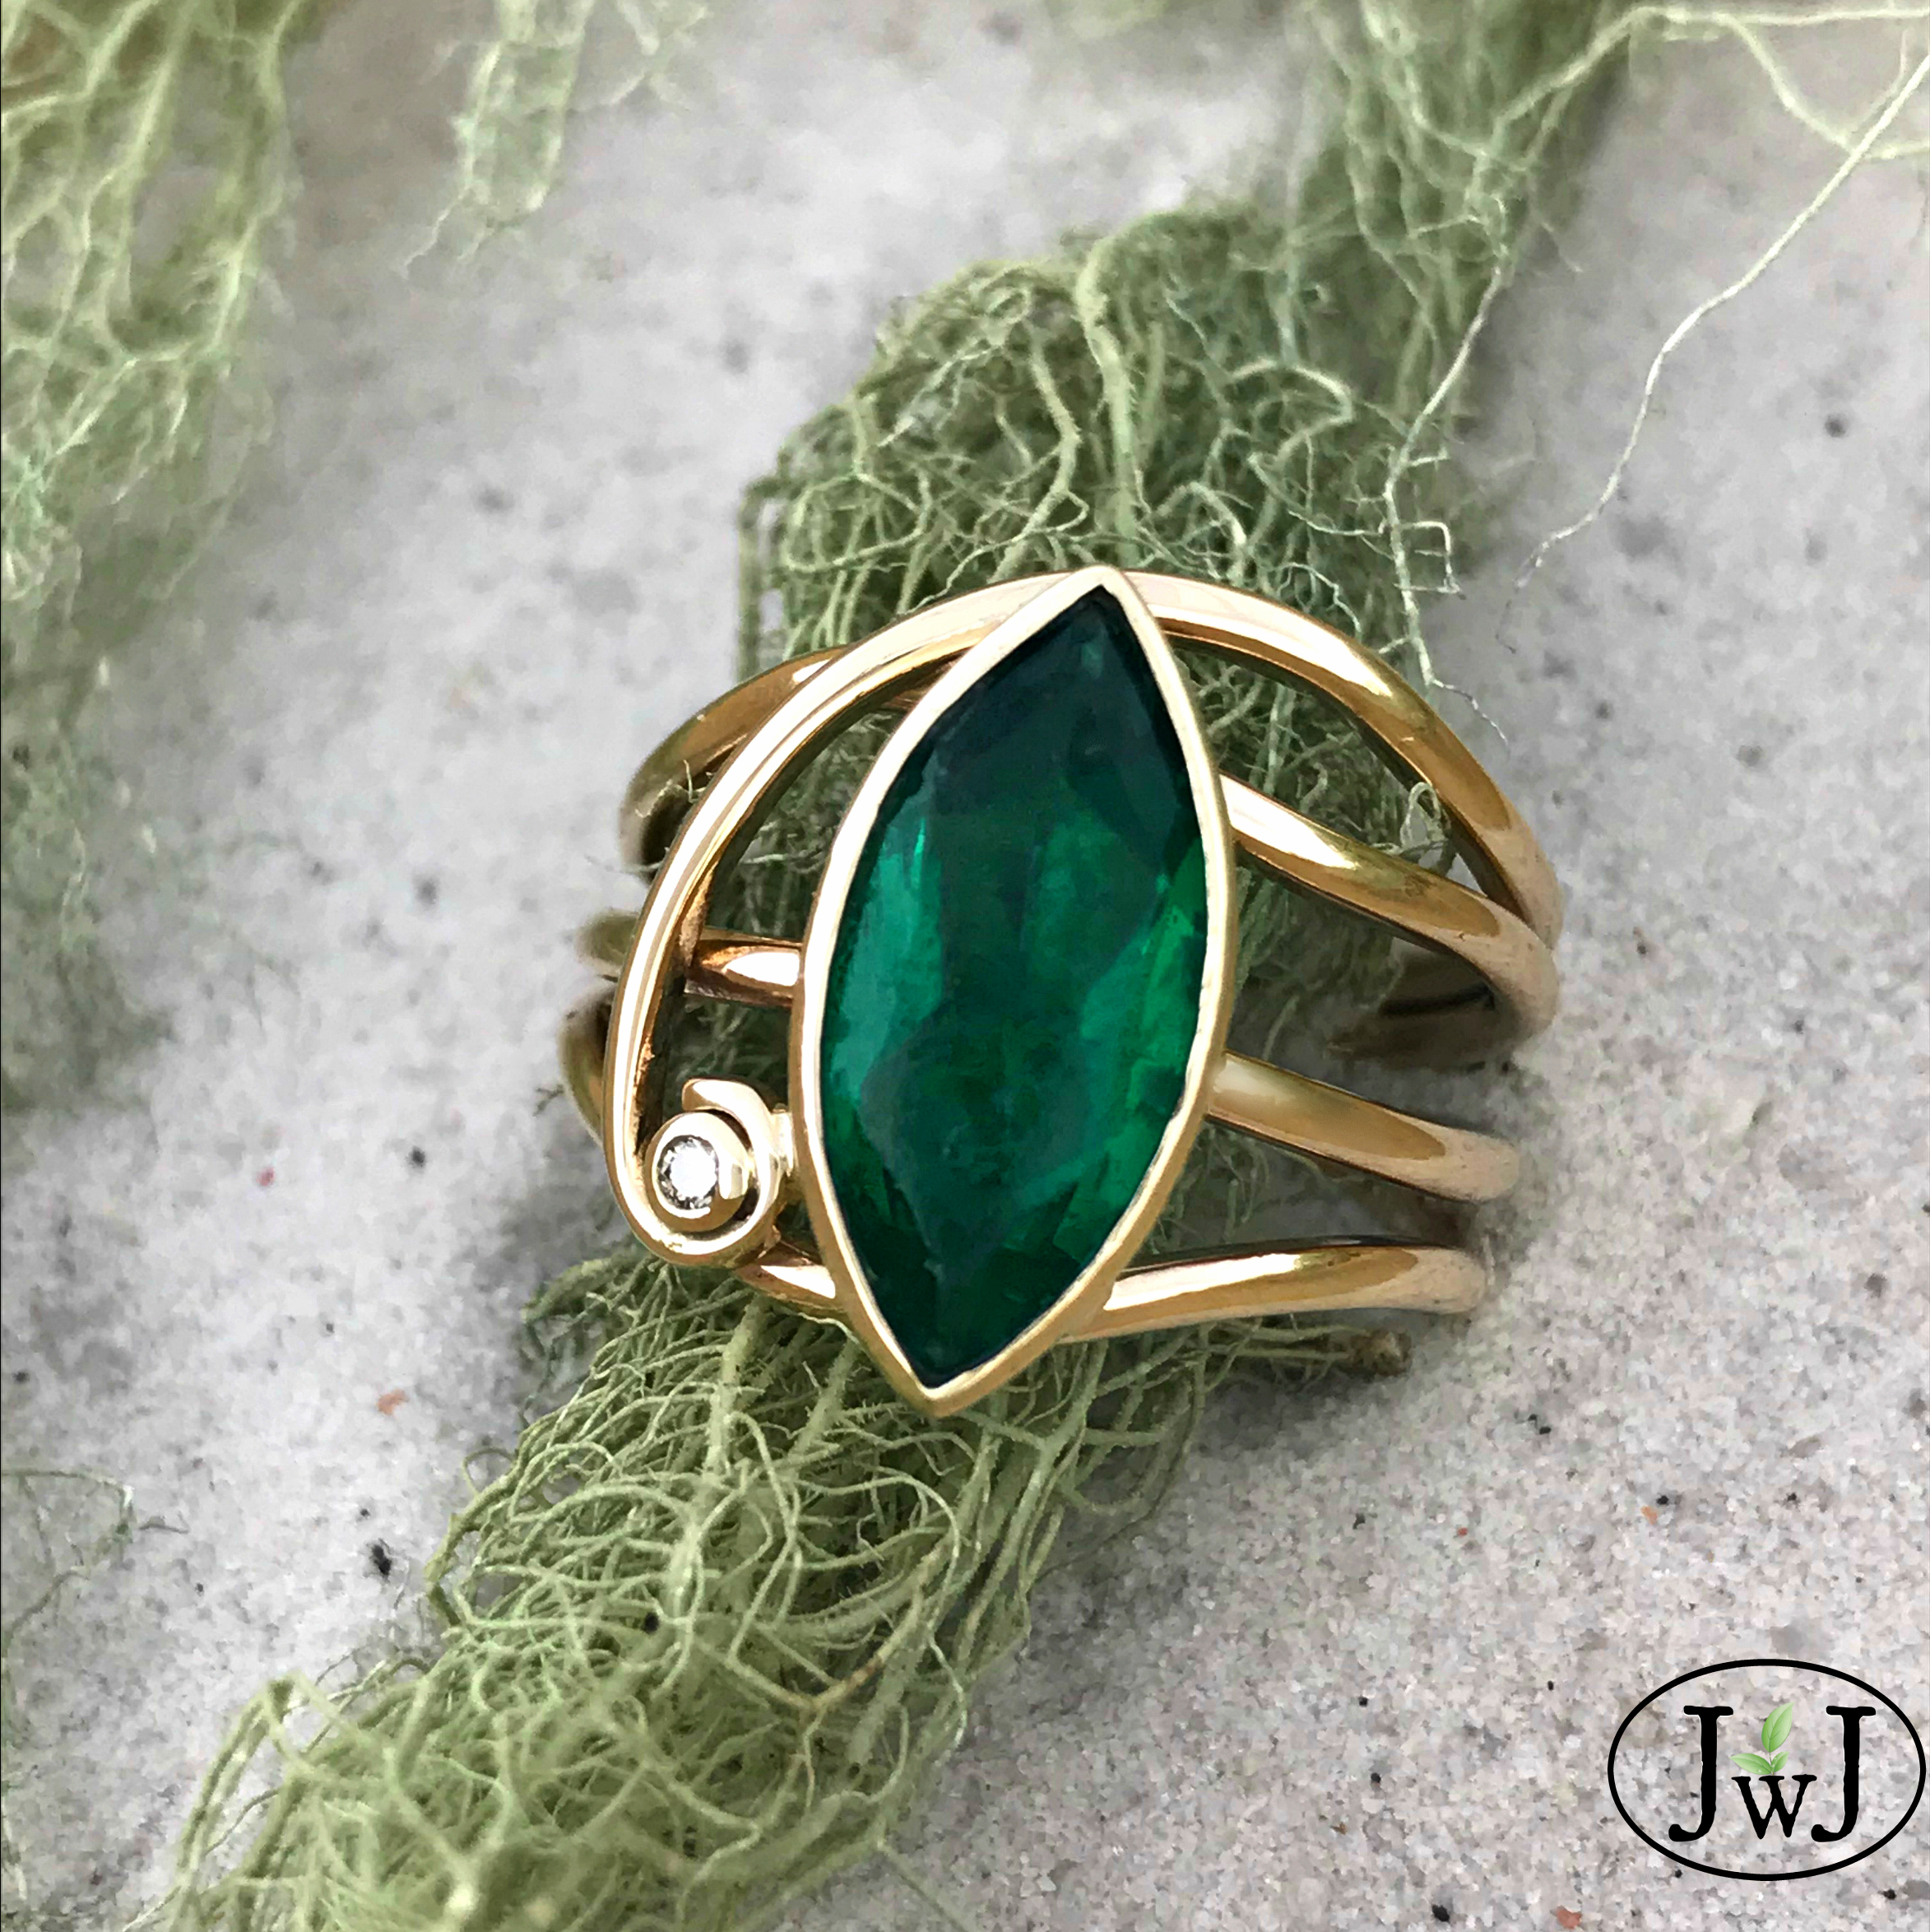 Diversity of Emerald Green Engagement Rings